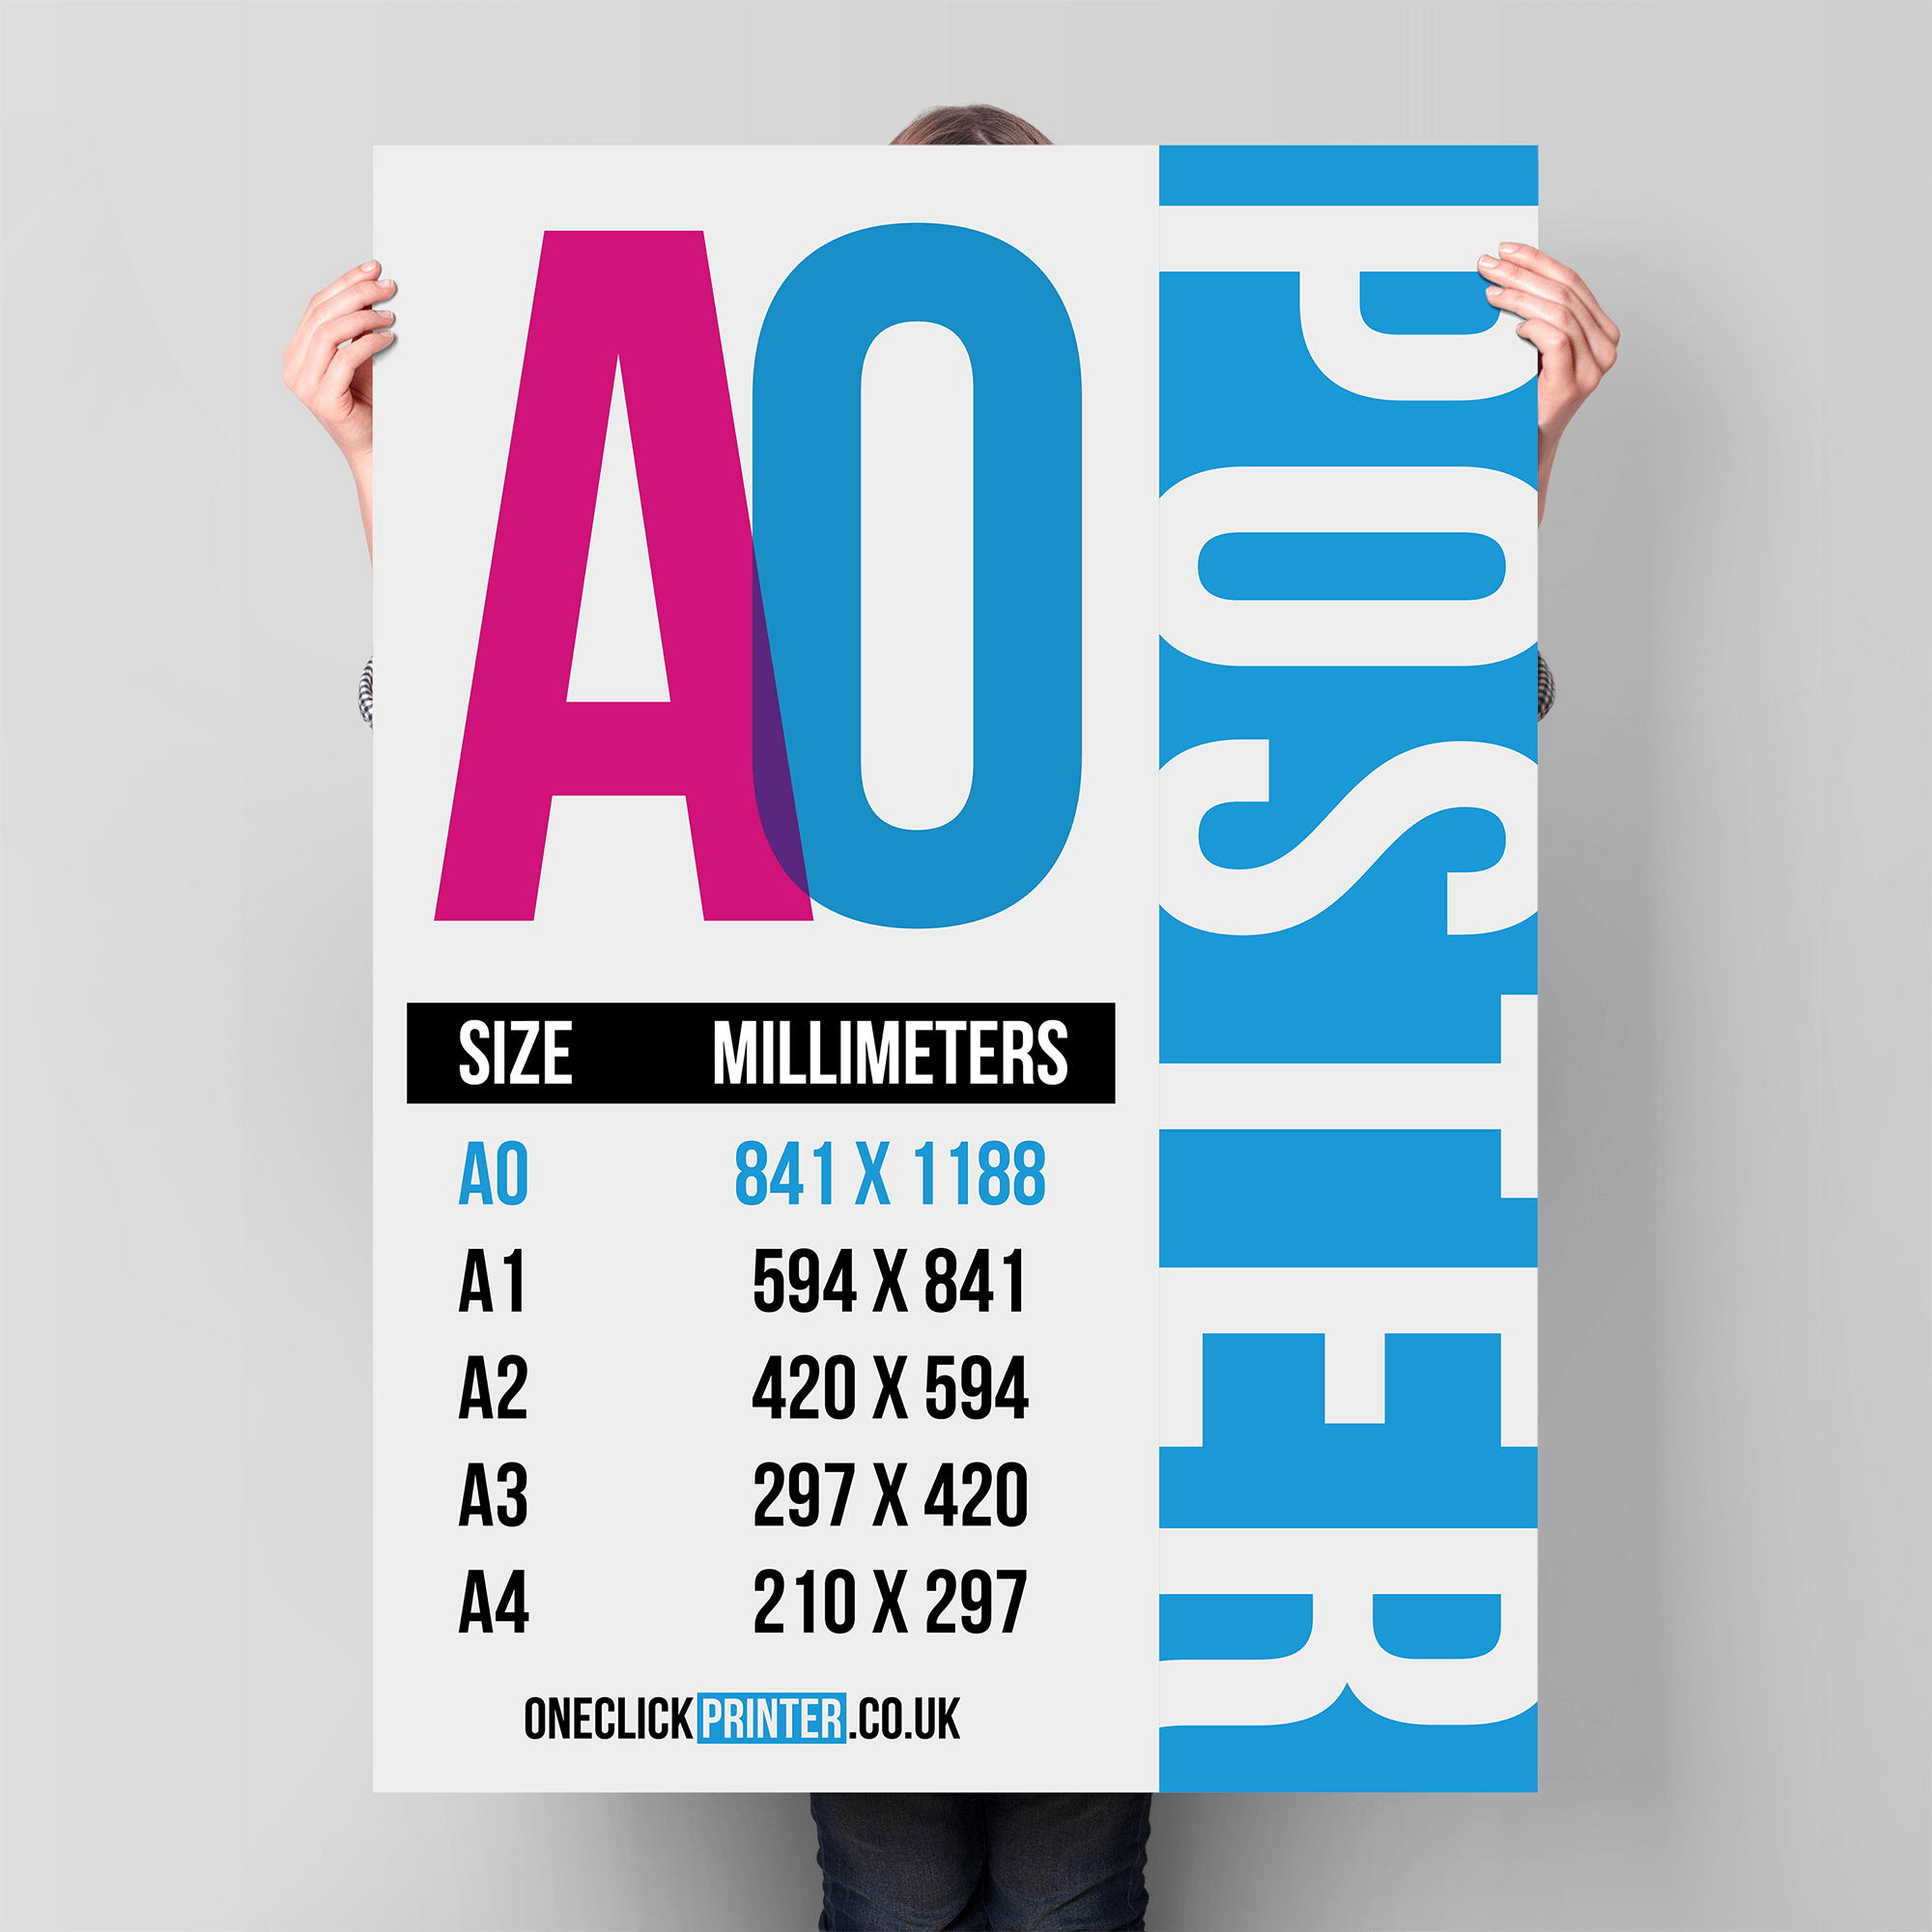 How To Design A0 Poster In Word - Printable Templates